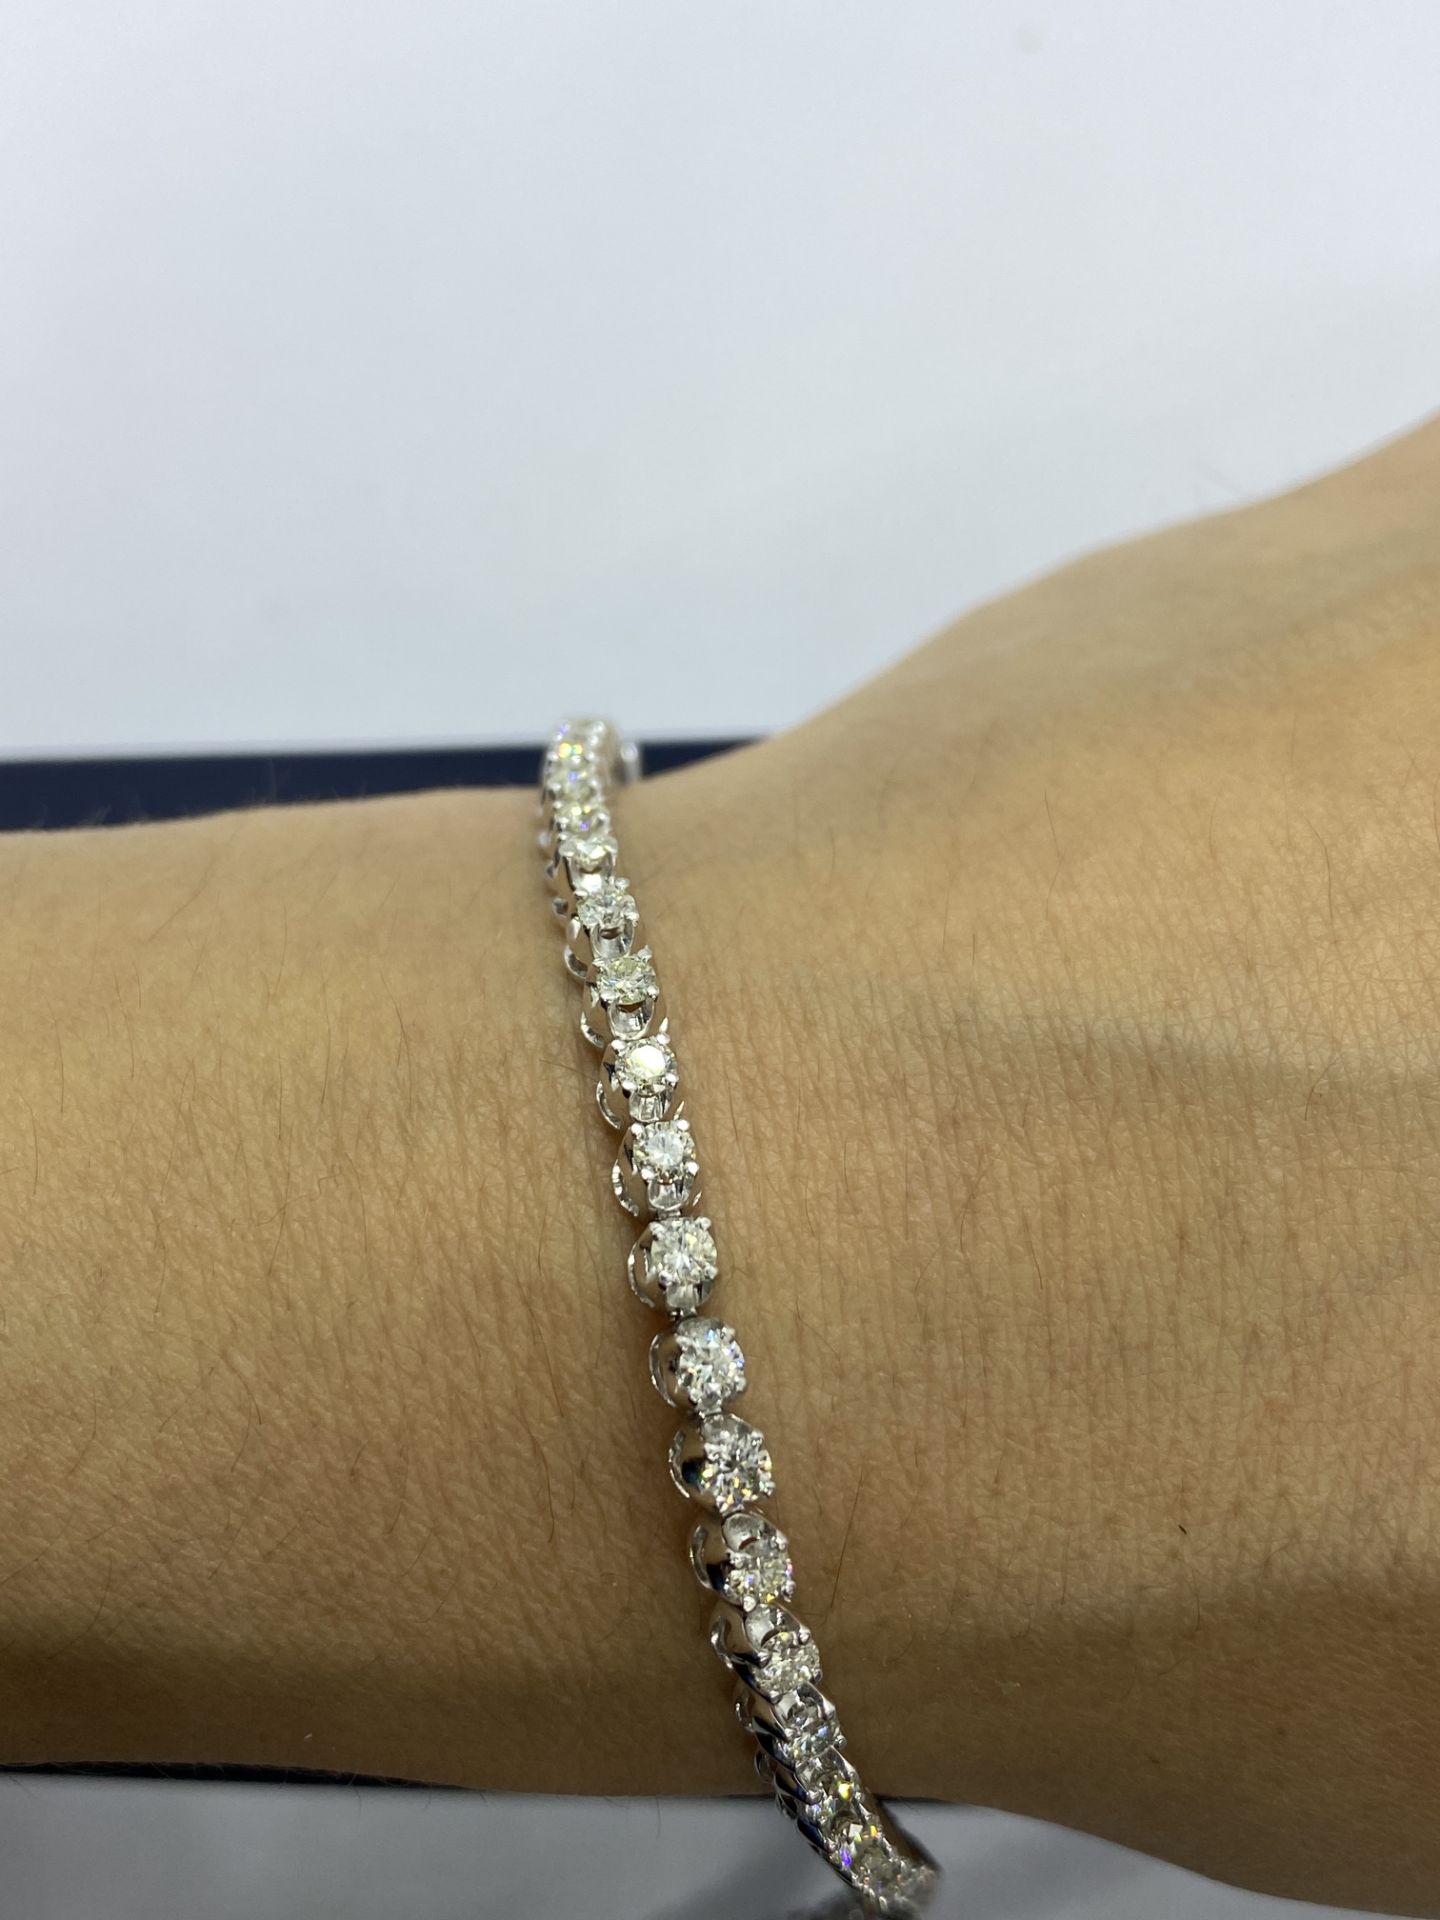 STUNNING 4.00ct DIAMOND TENNIS BRACELET SET IN WHITE GOLD - F/G/H SI1 APPROX - Image 4 of 5